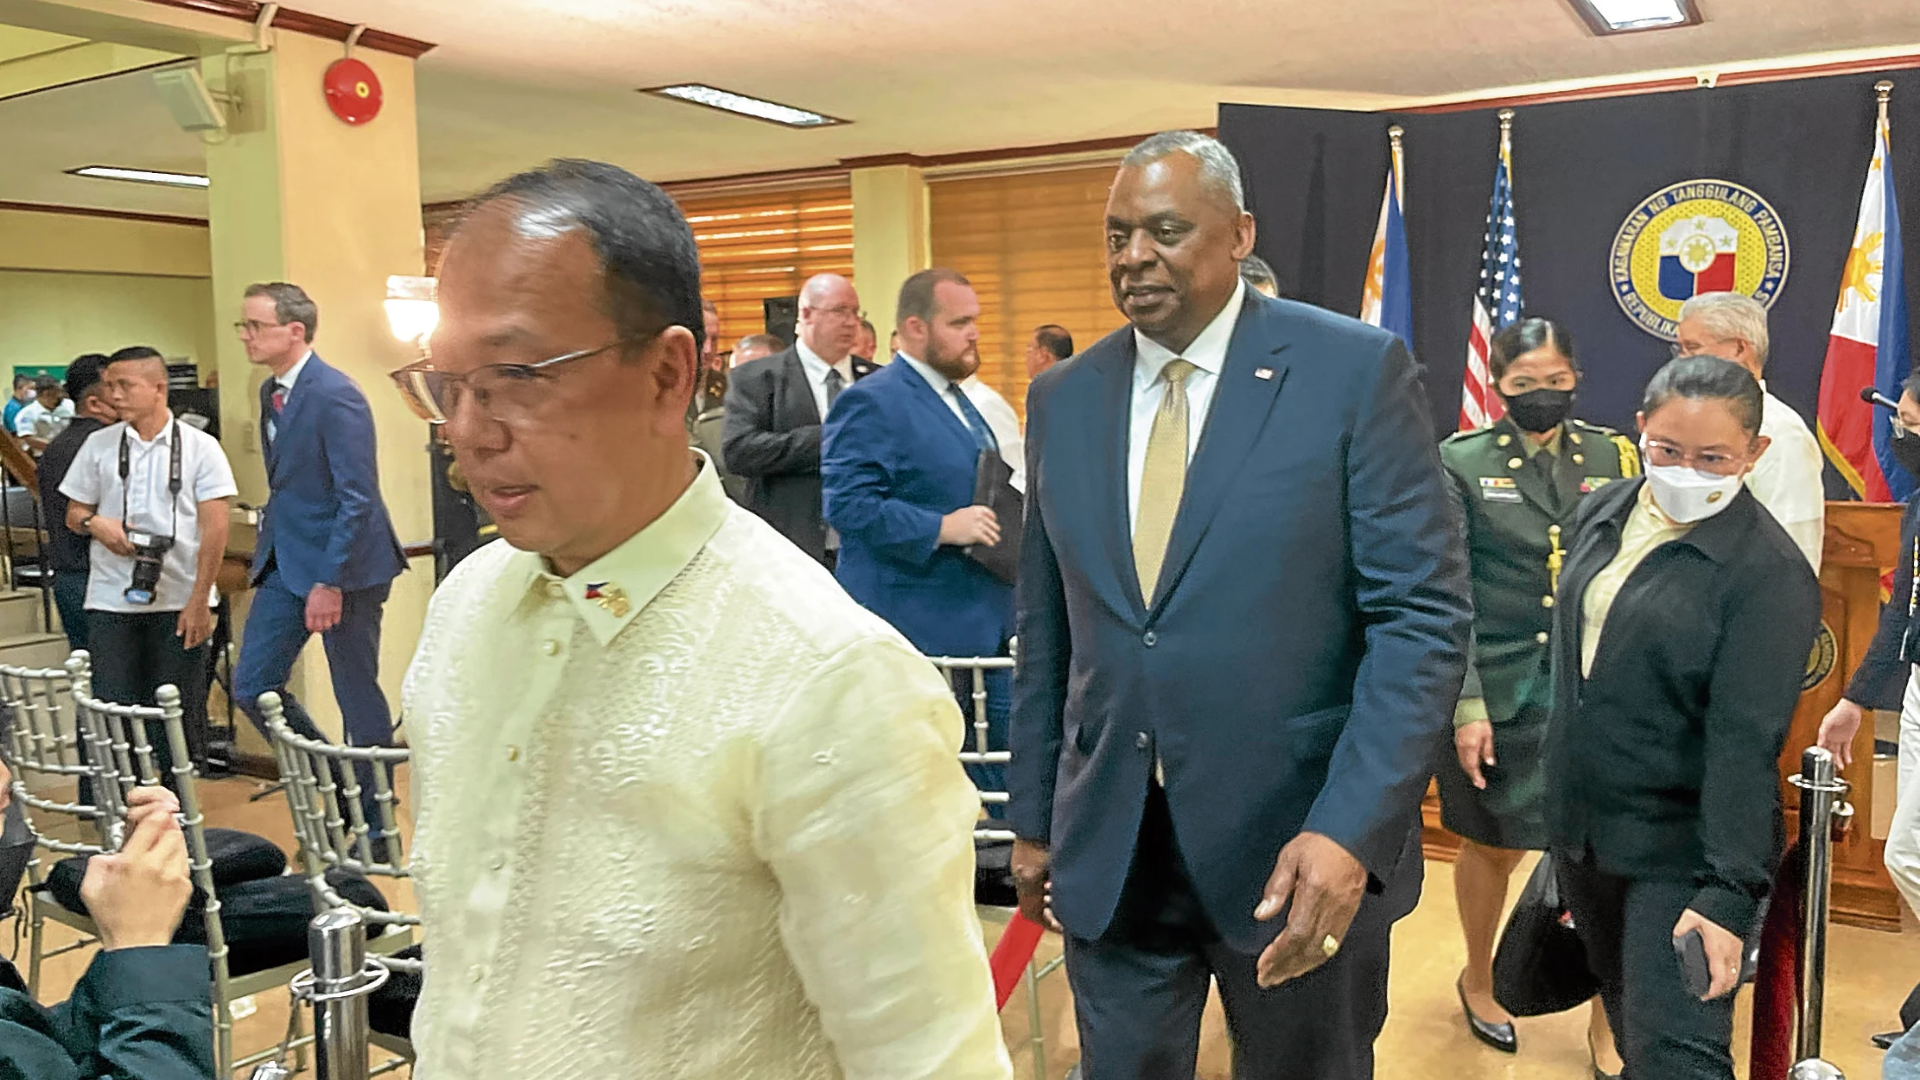 US and Philippines talk about collaborating on coast guard patrols in the South China Sea.